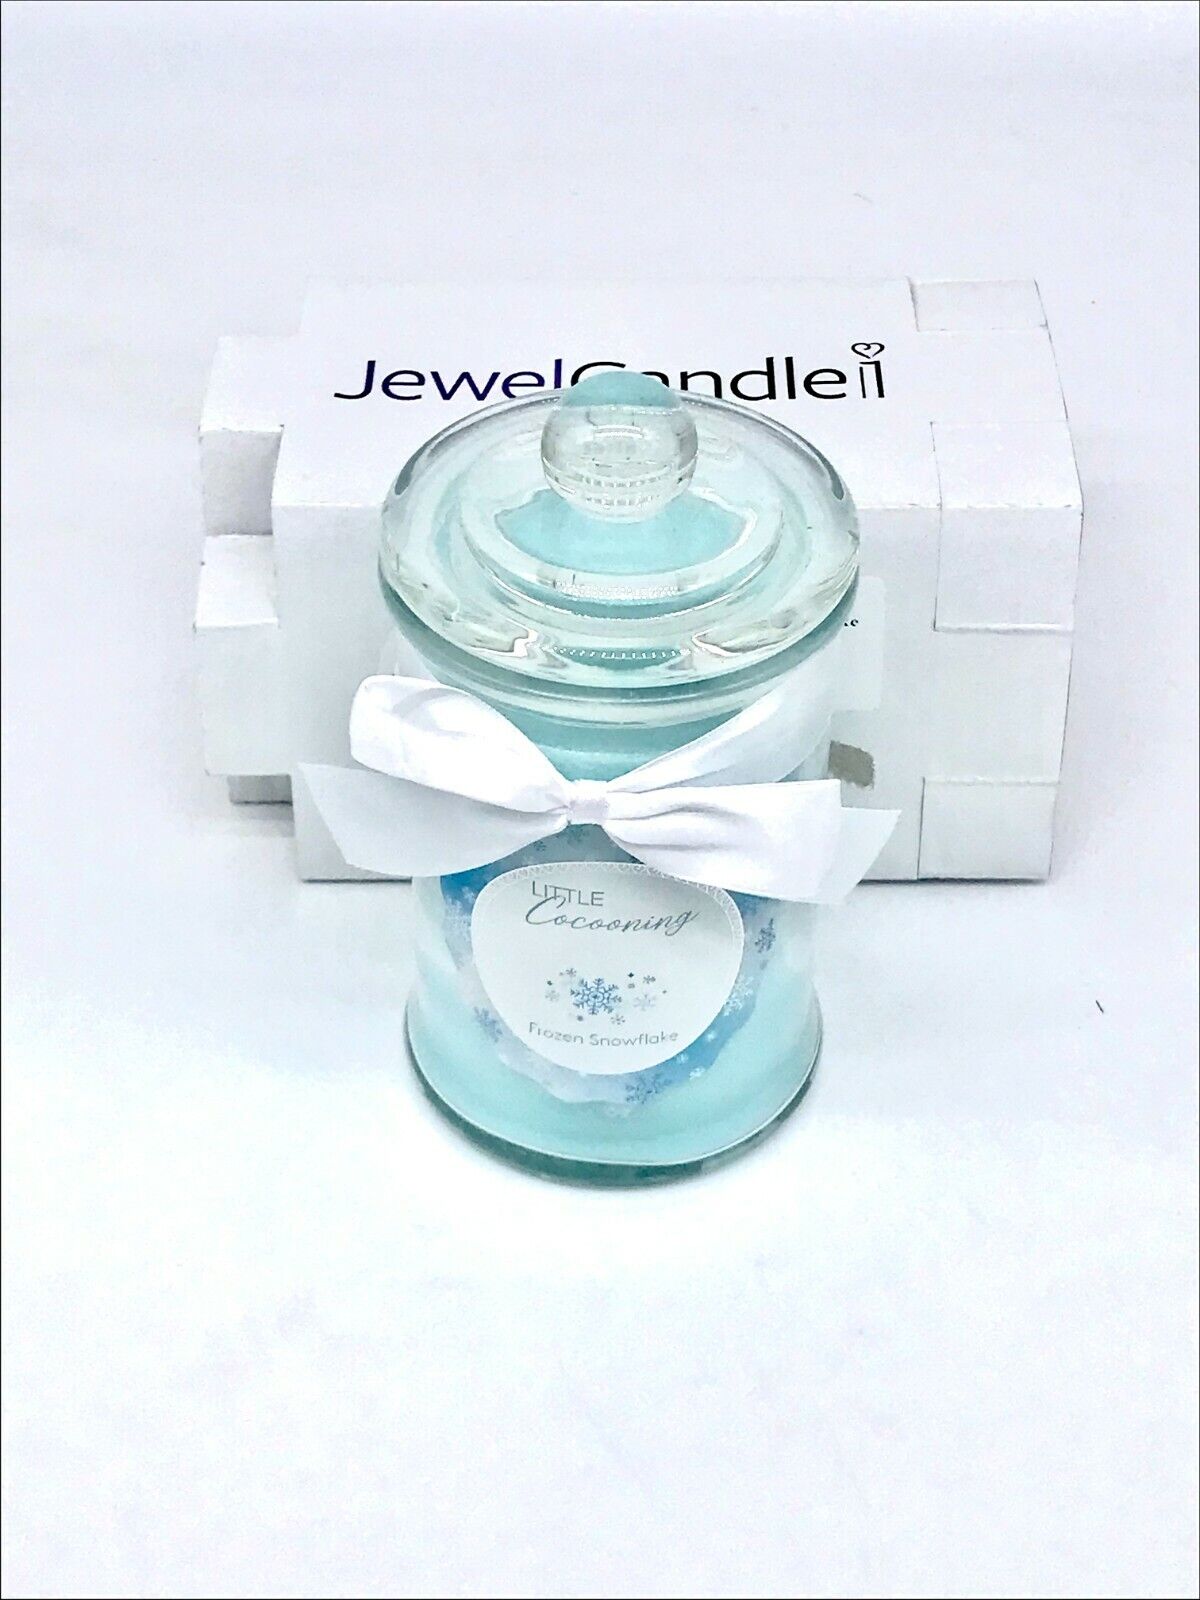 Jewelcandle Little Cocooning Scented Candle Big and Small Glass Home Decor